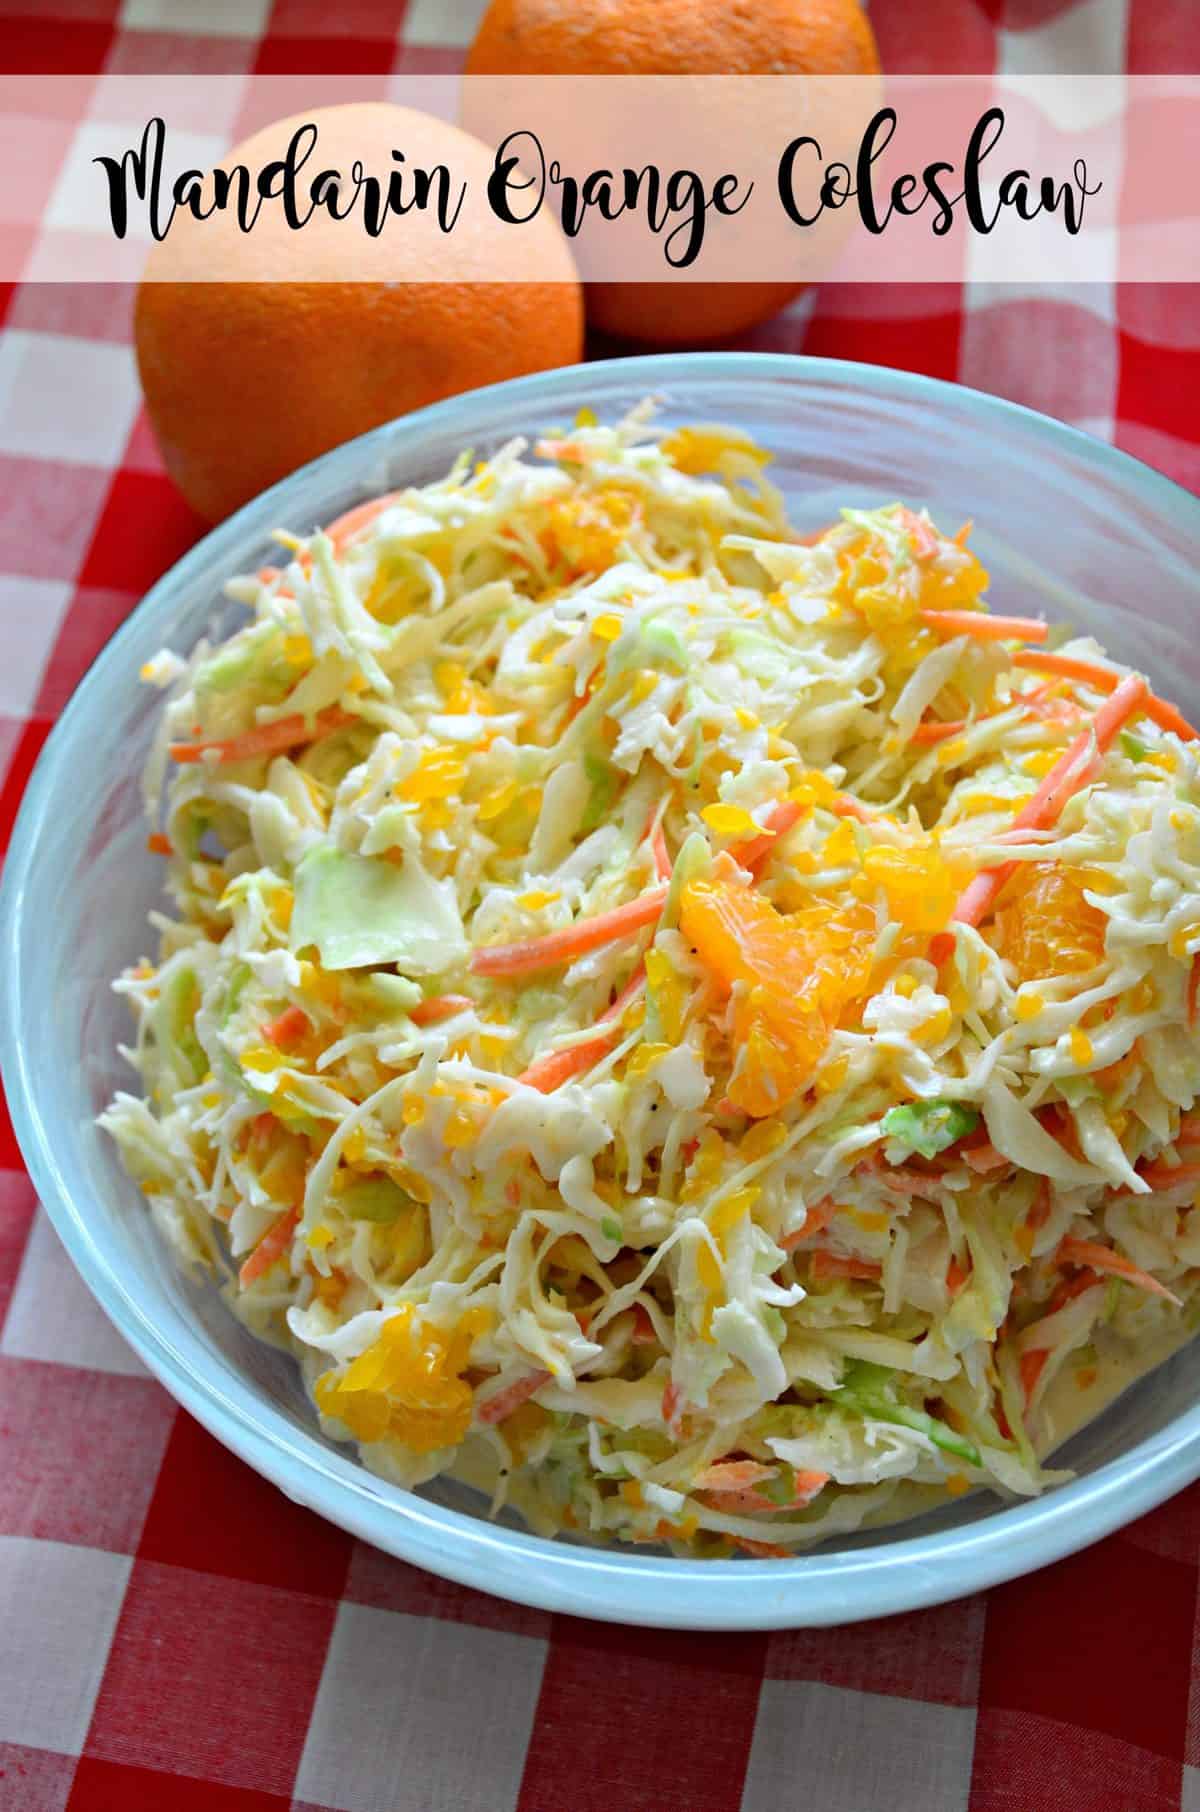 Closeup of a blue bowl with coleslaw that has oranges in it on a red and white checkered cloth.